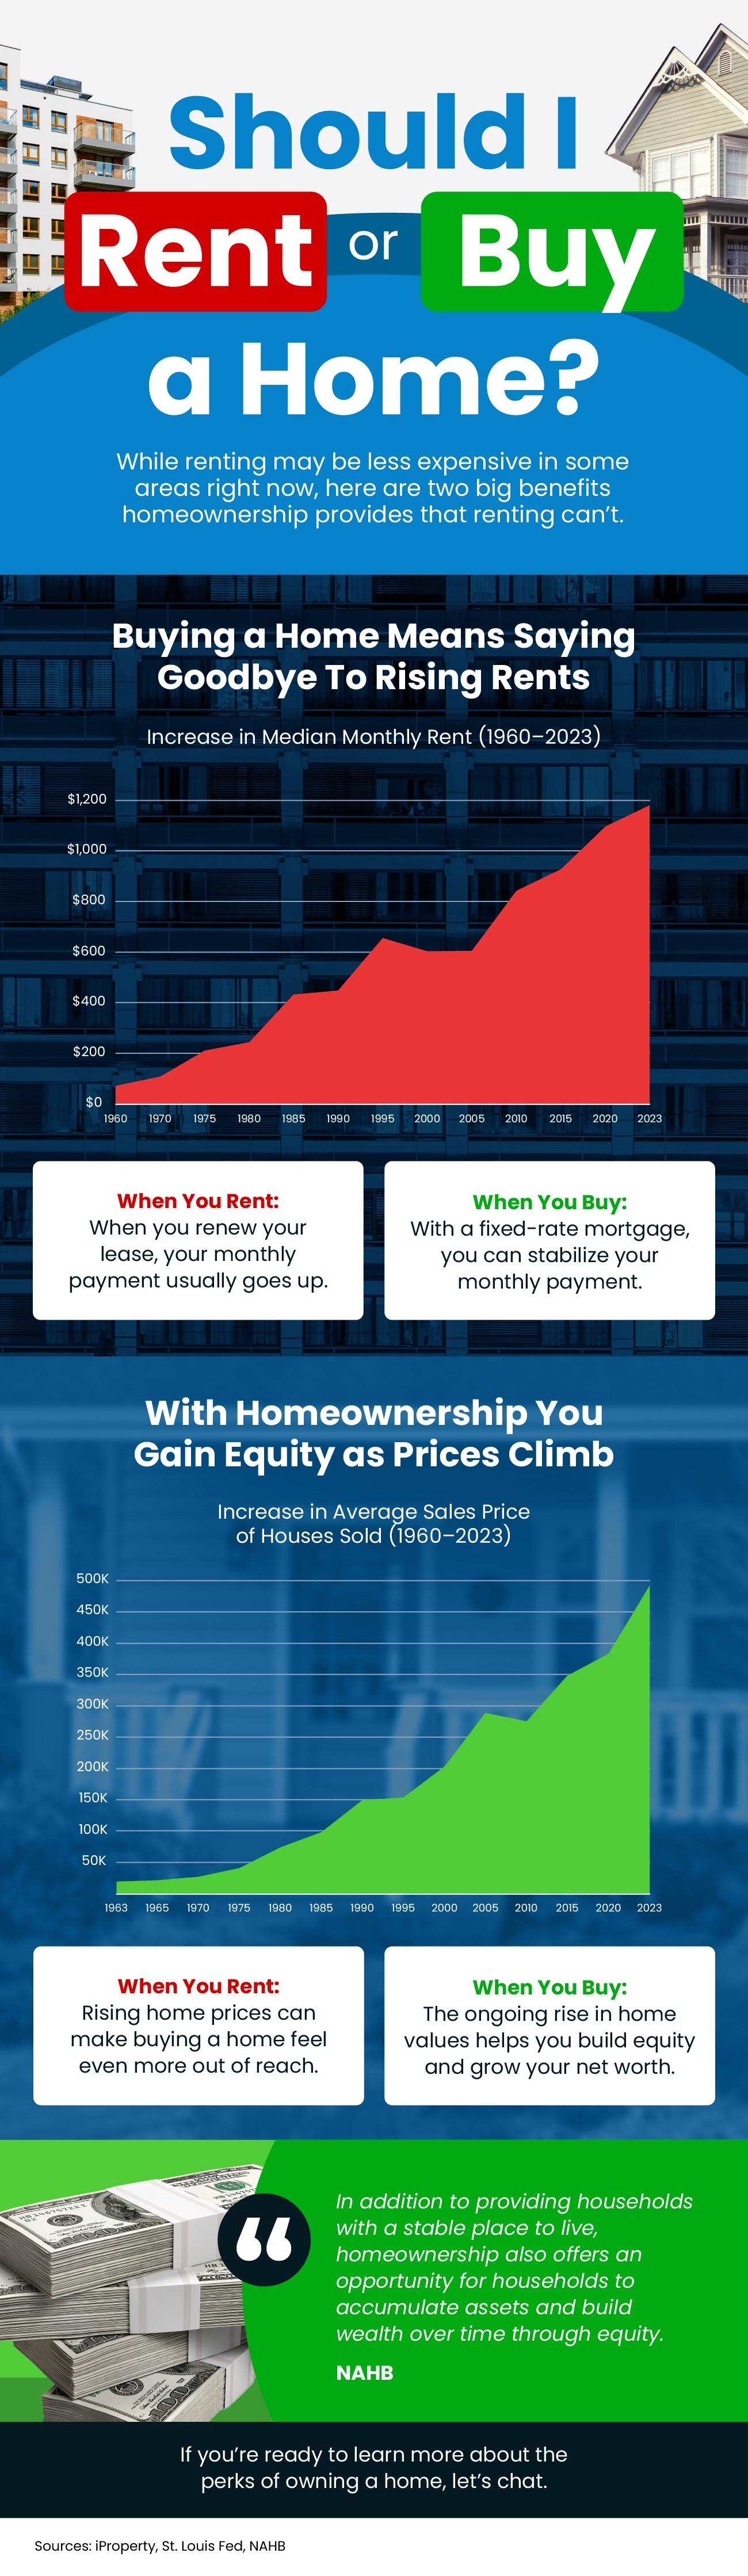 Should I Rent or Buy a Home? [INFOGRAPHIC]